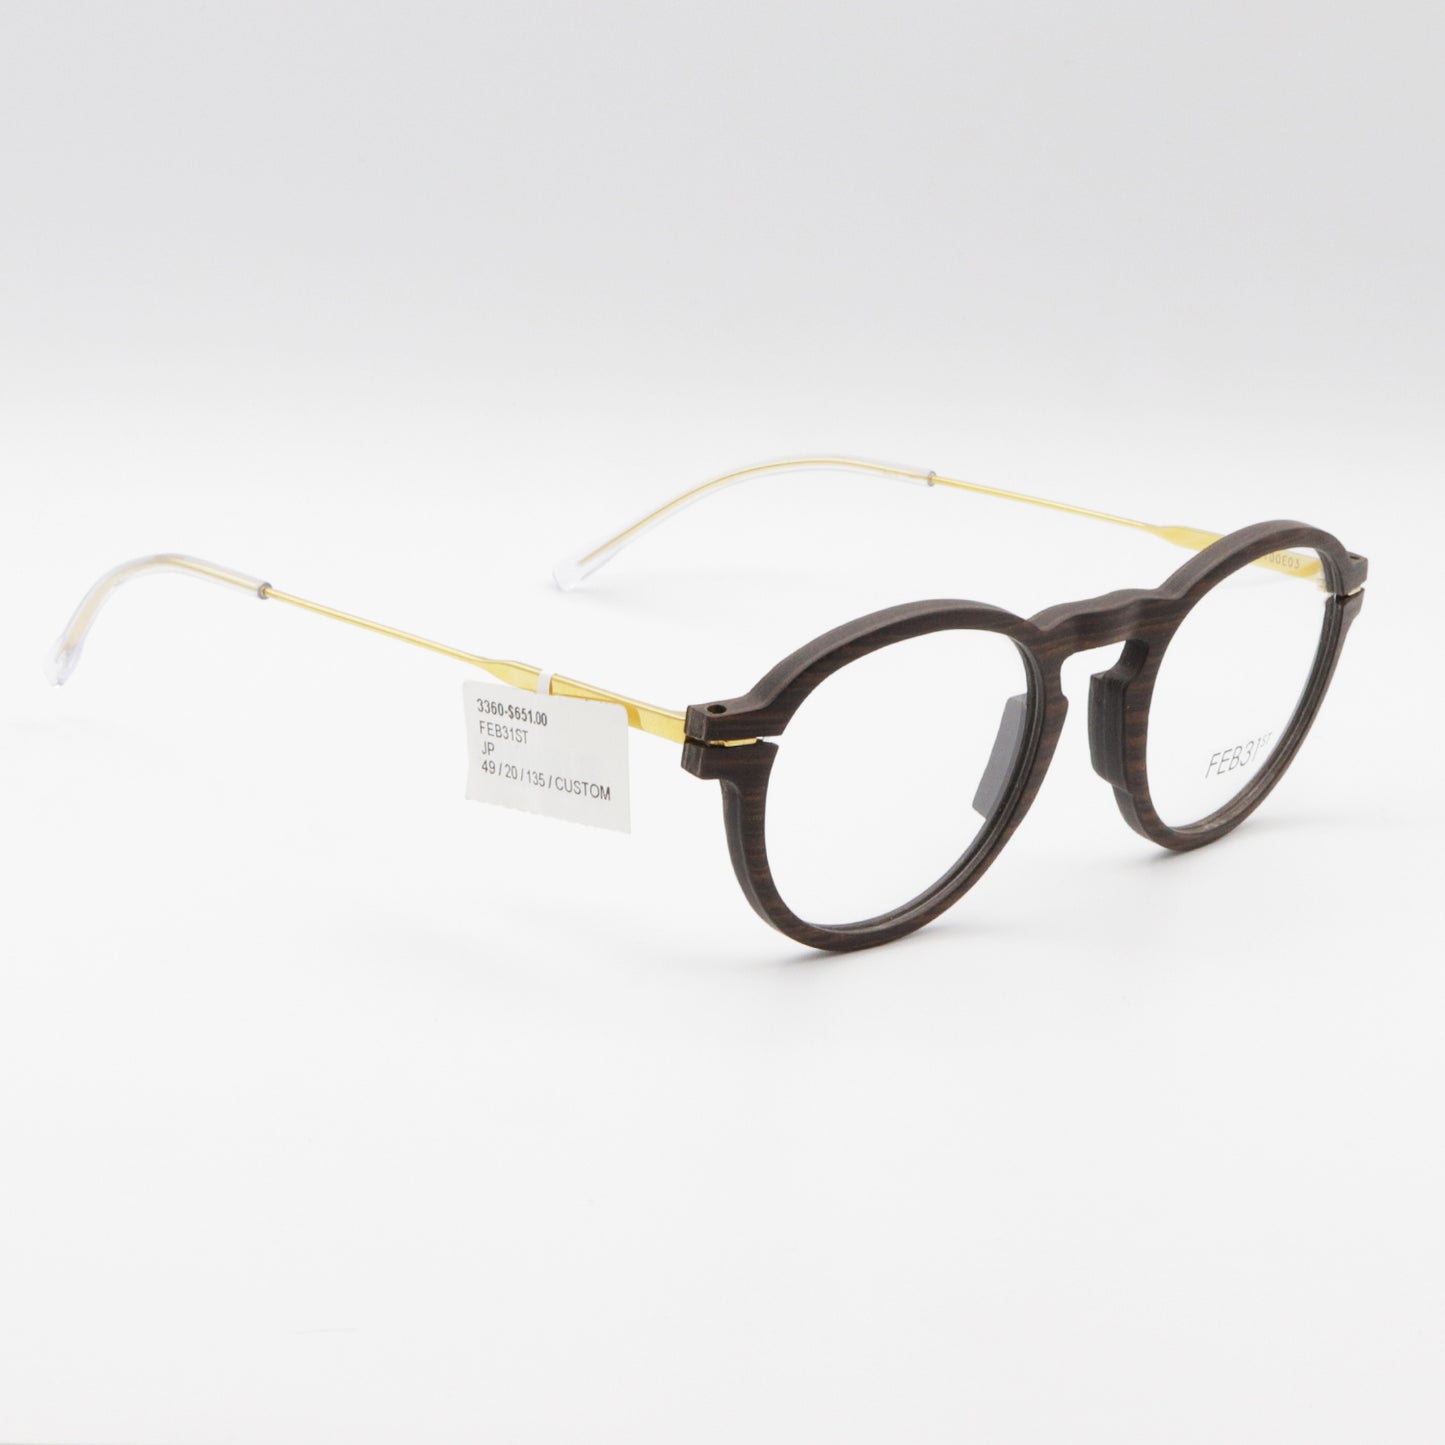 JP by FEB31st wooden glasses Brown and Gold